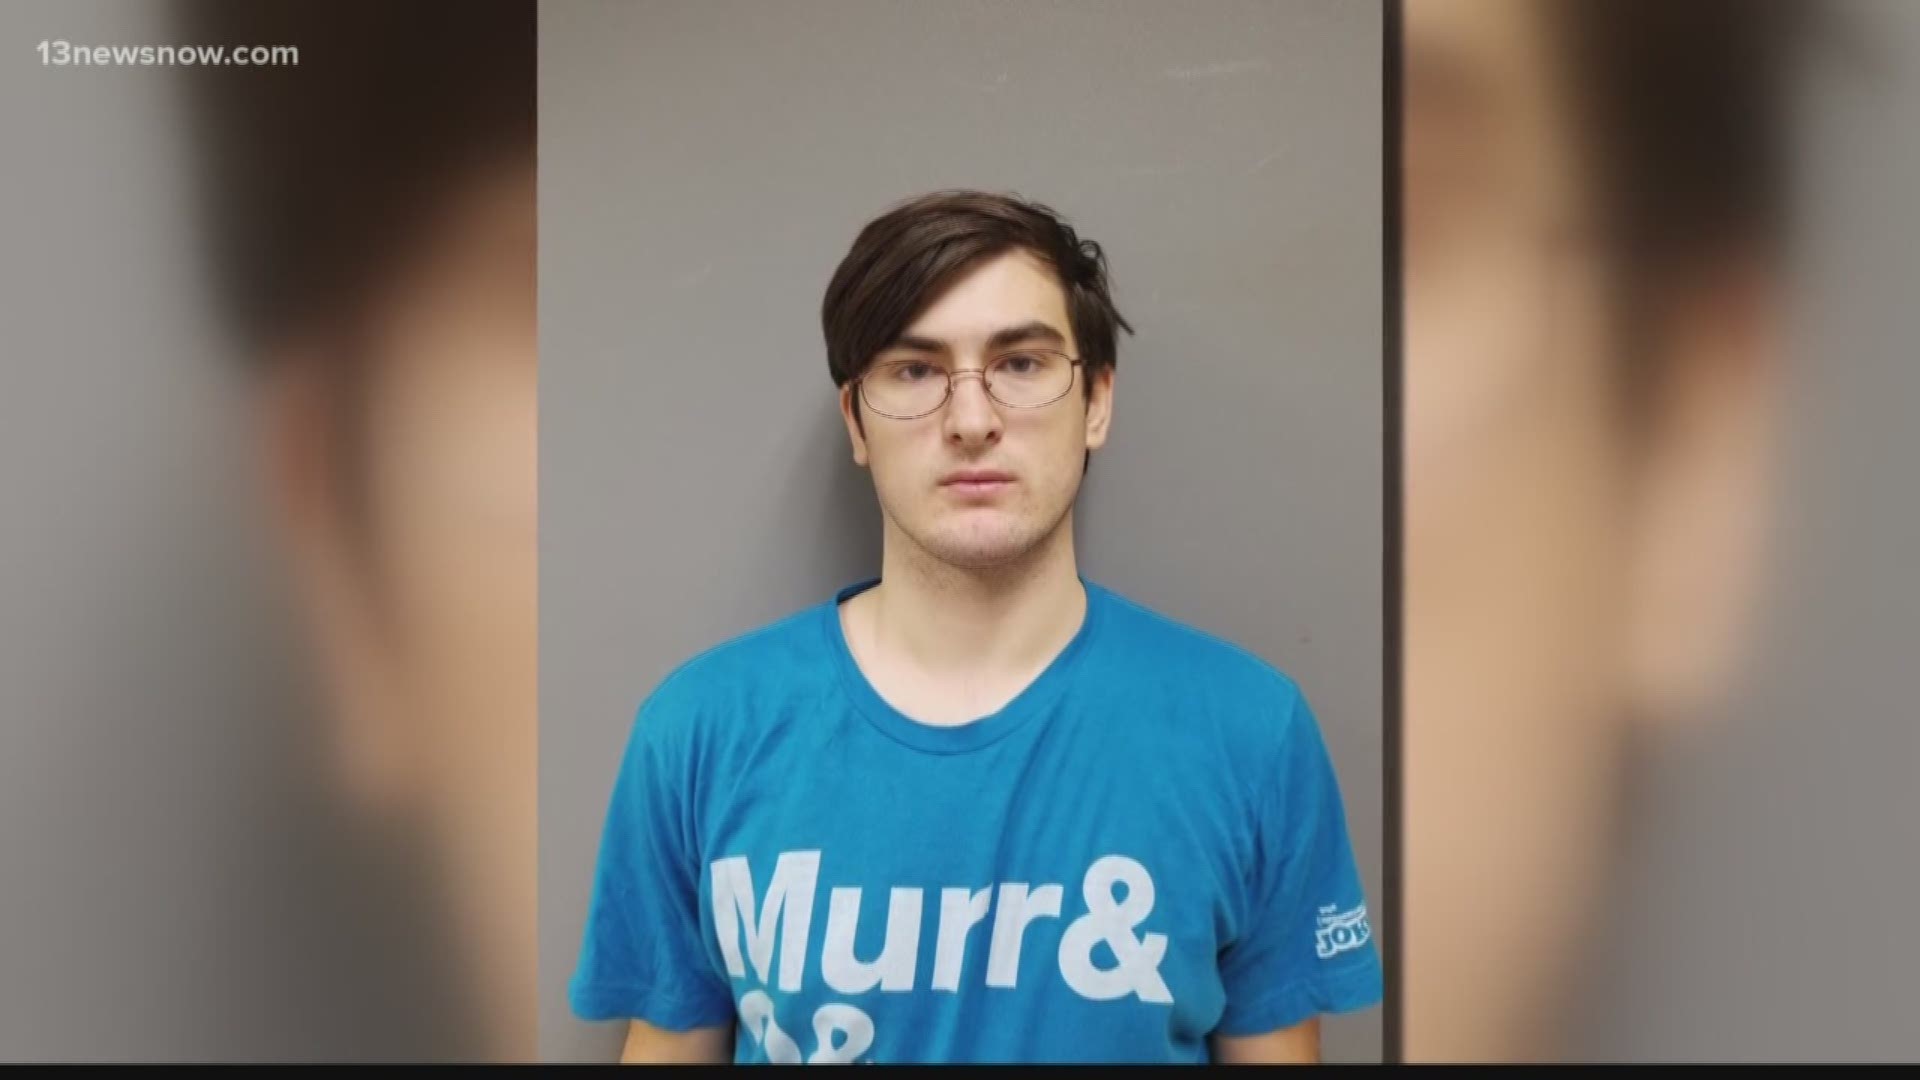 Sex Videos 18yar - Isle of Wight County Sheriff's Office arrests 18-year-old for child porn |  13newsnow.com